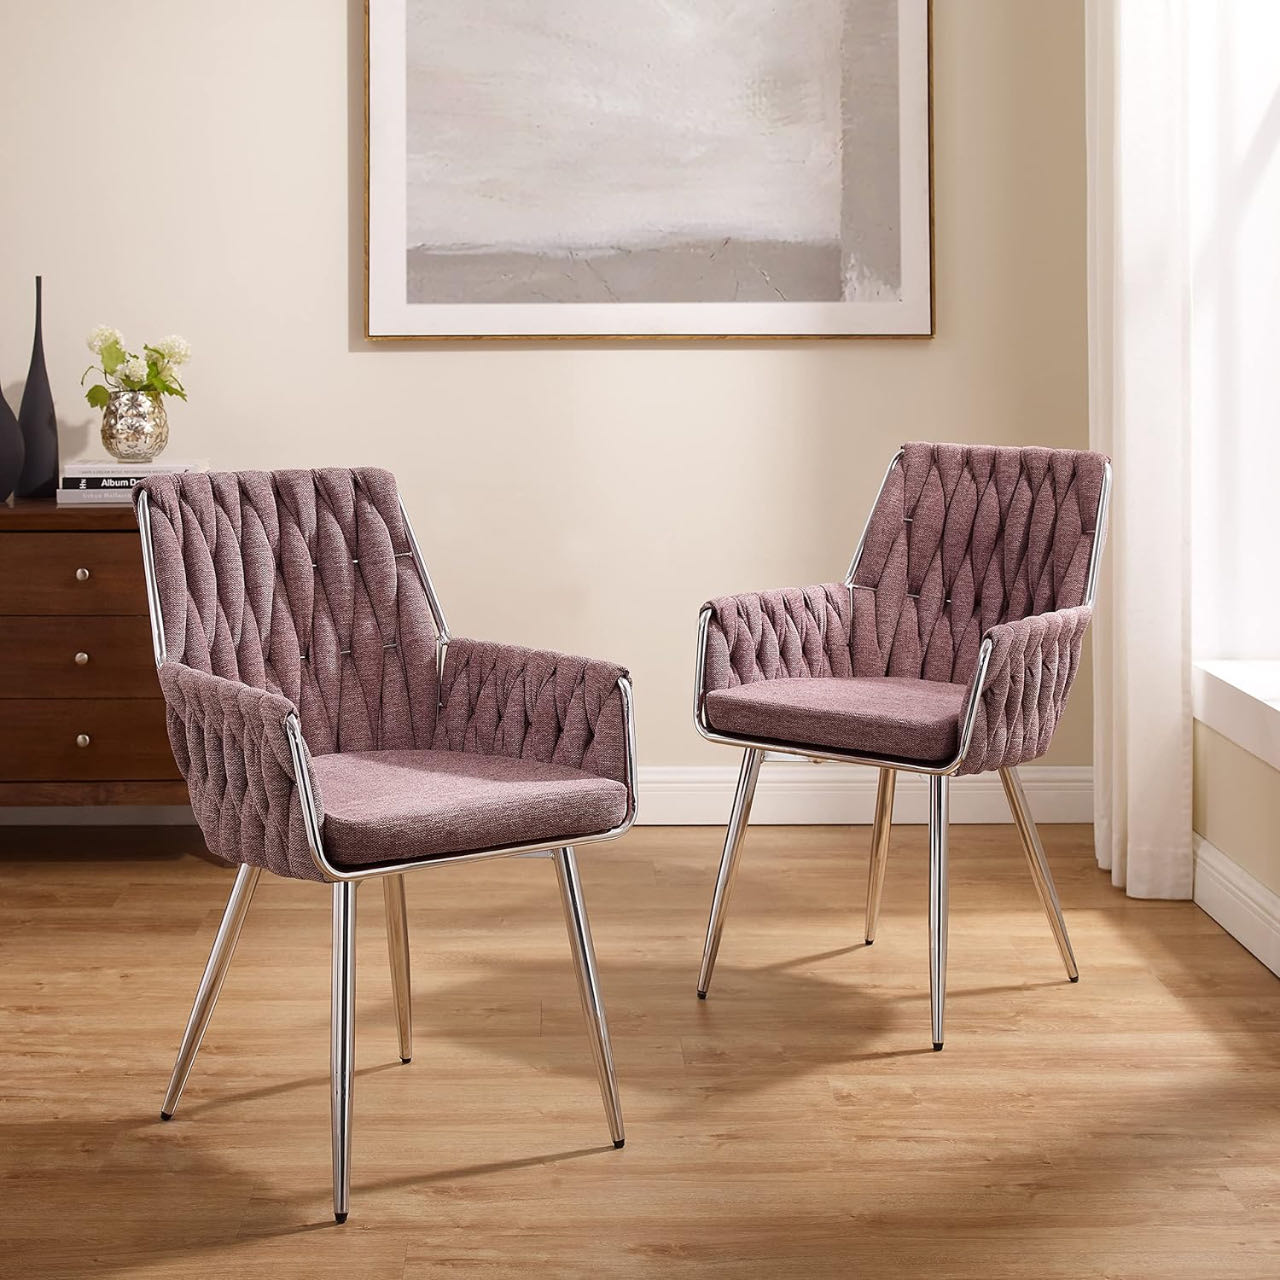 Art Modern Dining Chairs, Hand Weaving Accent Chairs